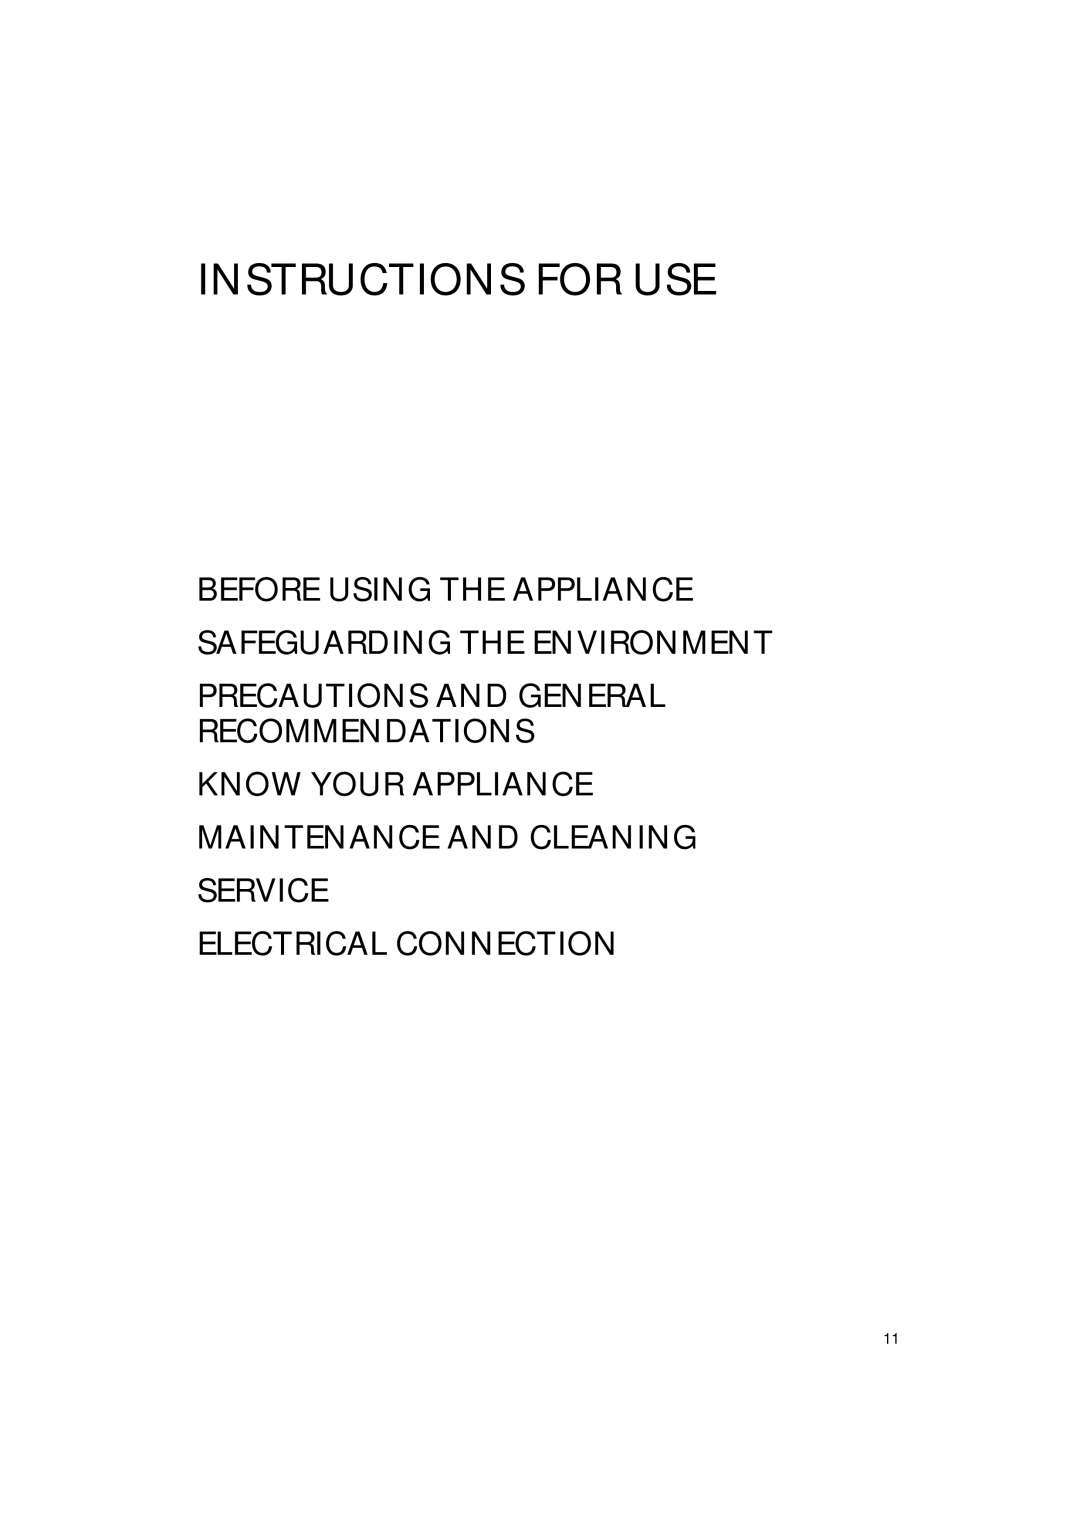 Smeg VR115B1 manual Before Using The Appliance Safeguarding The Environment, Precautions And General Recommendations 